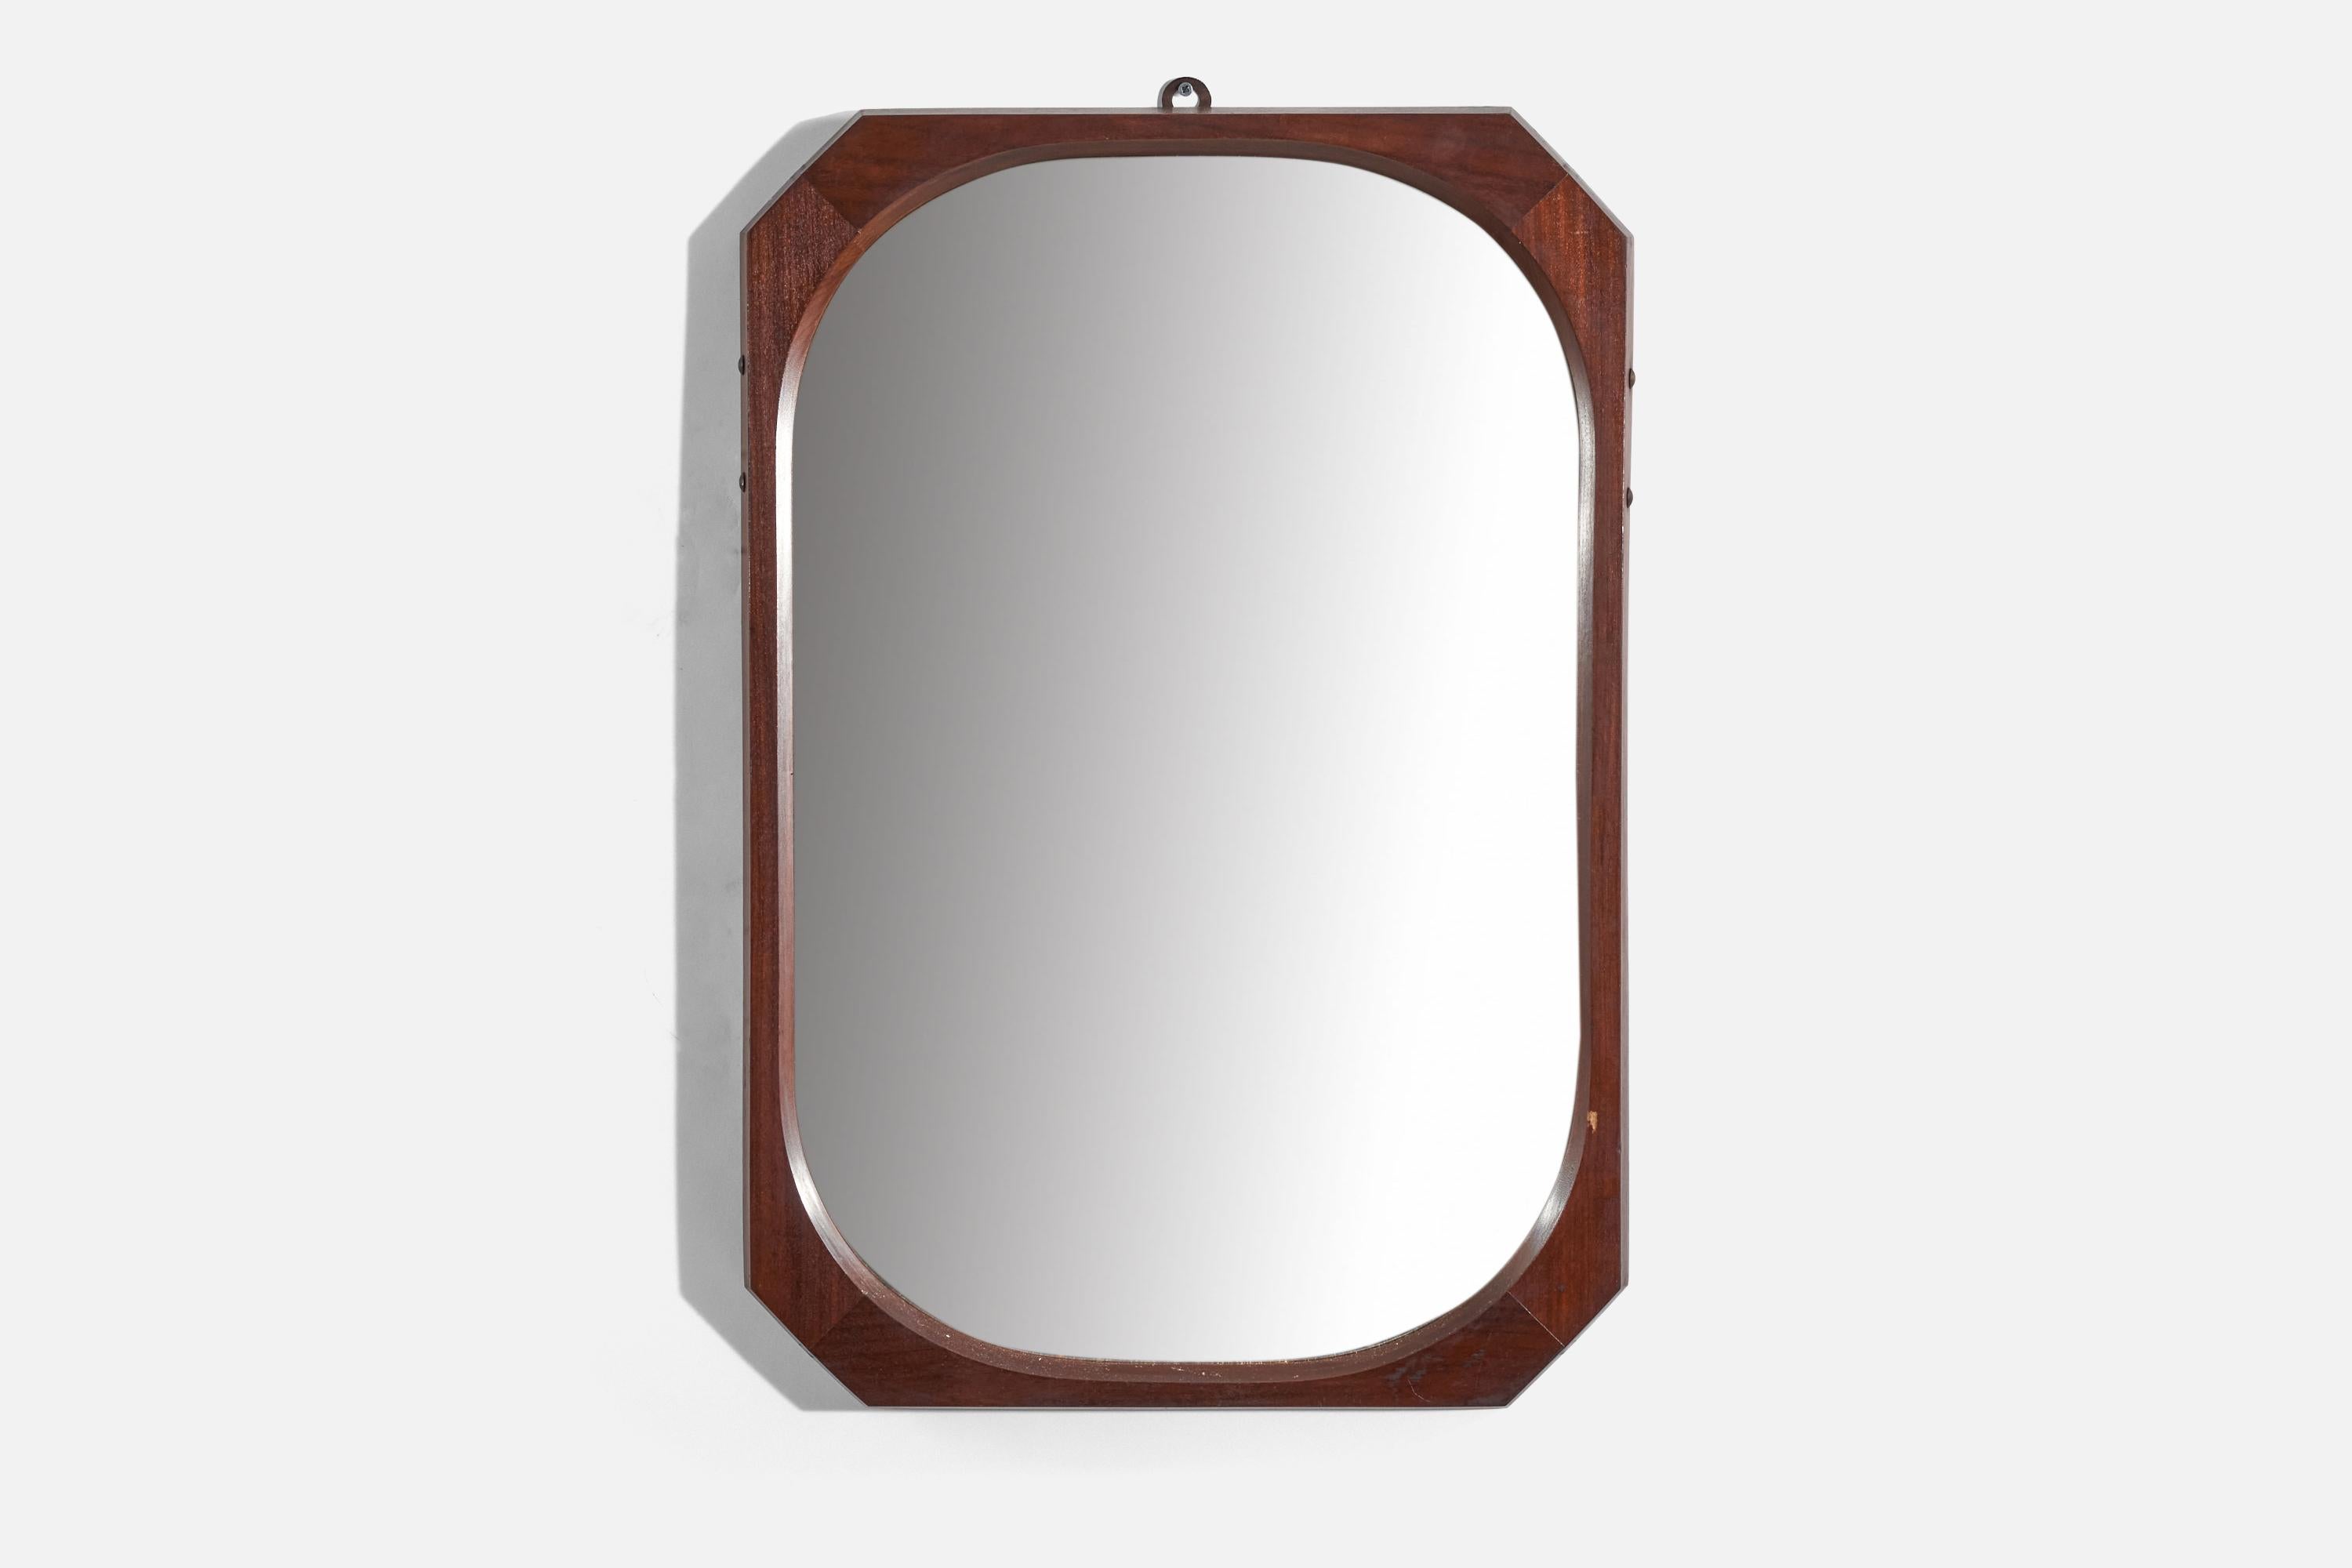 A dark-stained wooden wall mirror designed and produced in Italy, c. 1950s.
 